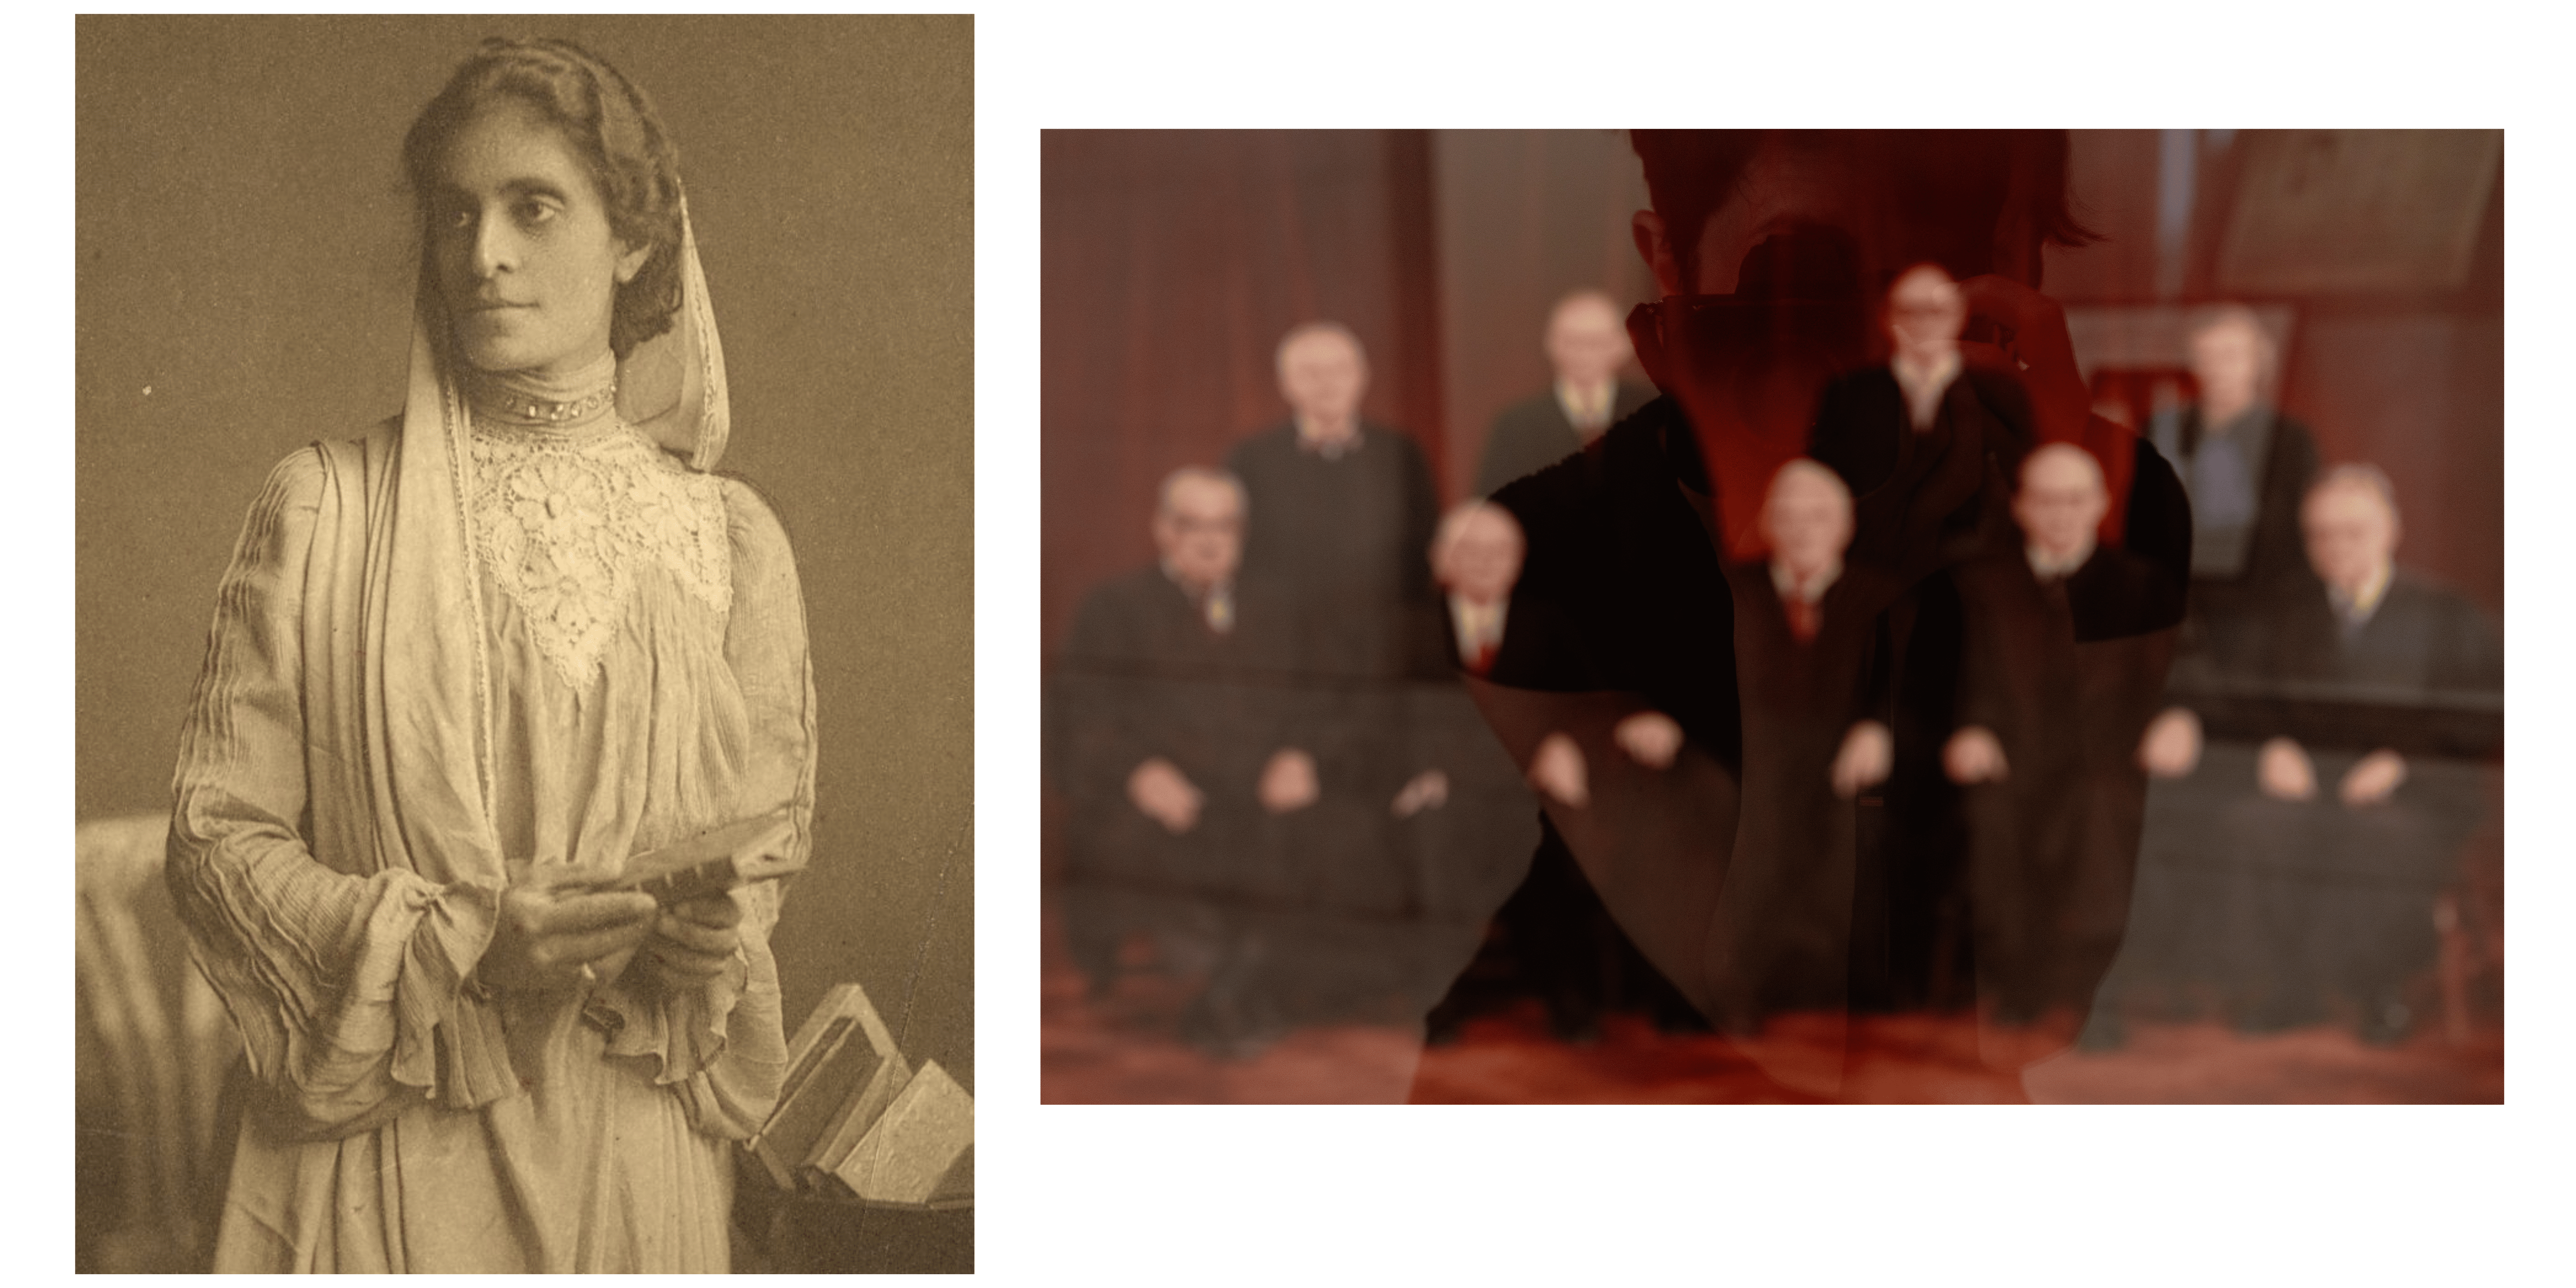 Two images side by side. In the first, a sepia portrait of an Indian woman holding a book. The woman wears a light coloured dress with long voluminous sleeves, floral patterned lace around the collar and a light veil on her head. In the background are more books. In the second, a photo of a group of formally dressed judges, features eight men and one woman against a red background. It is overlaid with a reflection of a woman with short hair who takes a photograph of the image.